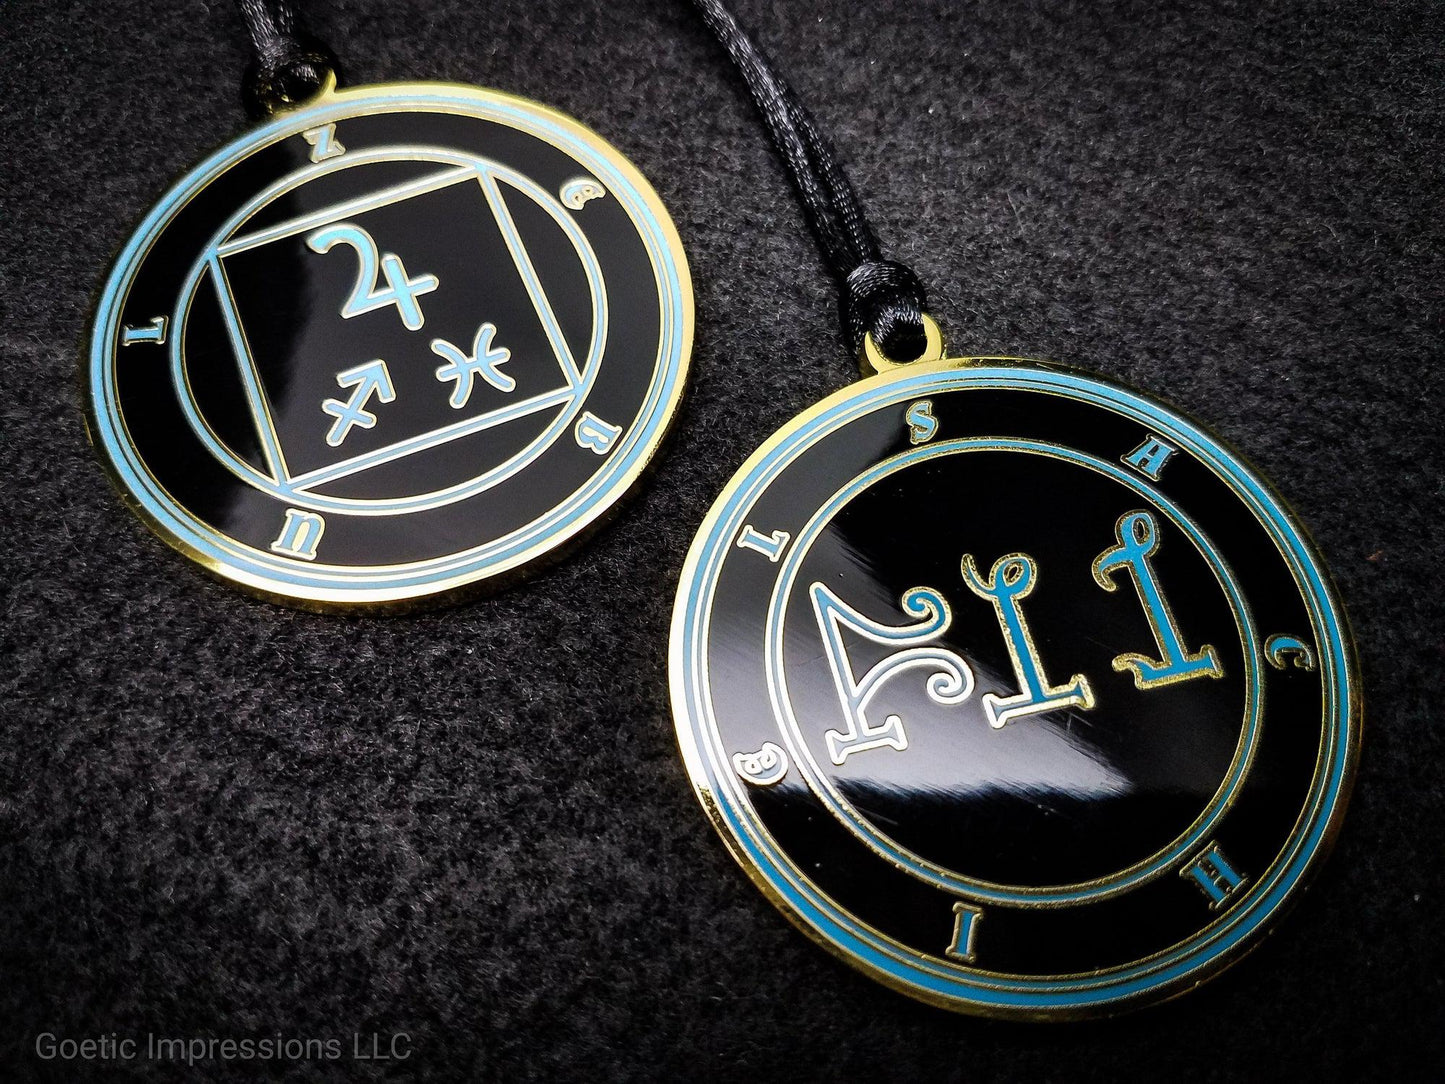 Heptameron Inspired Archangel Pendant featuring the seal and sigils of Archangel Sachiel.  Featuring on the reverse side of the talsiman, the Heaven Zebul and astrological symbols of Jupiter, Sagittarius and Pisces based on Cornelius Agrippa